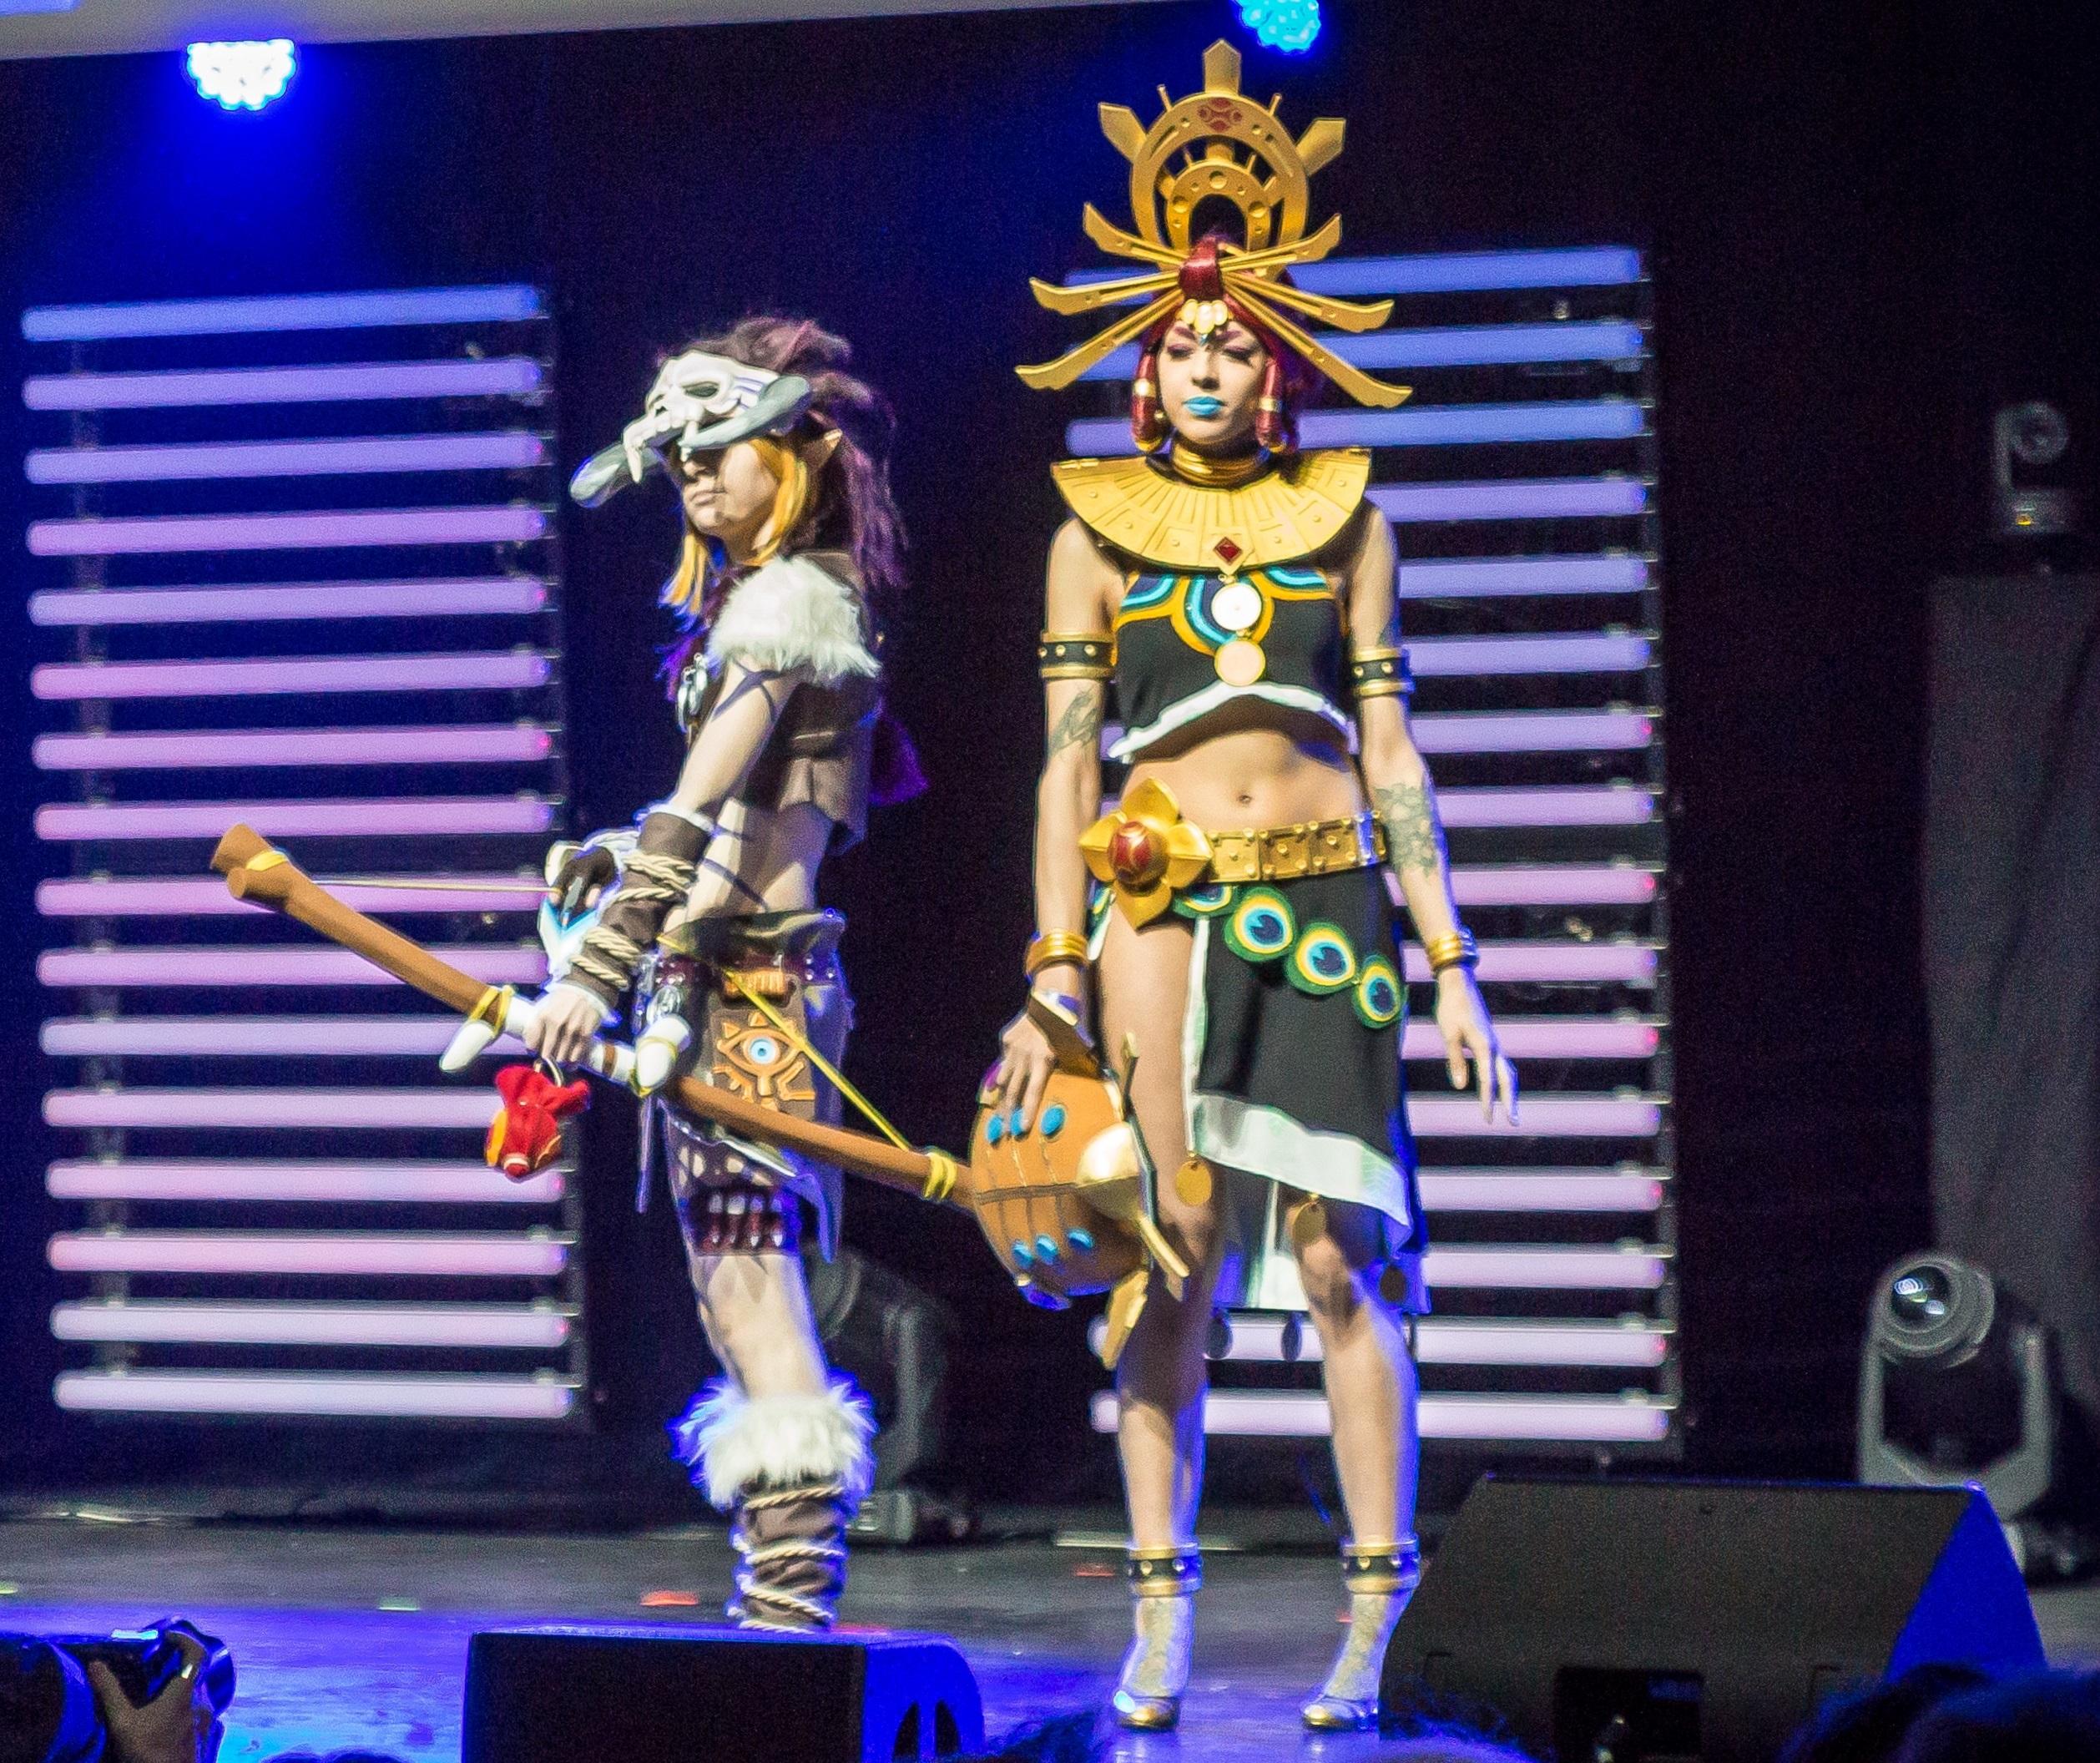 File:The Legend of Zelda - Breath of the Wild cosplay 2.jpg - two women in costumes on stage